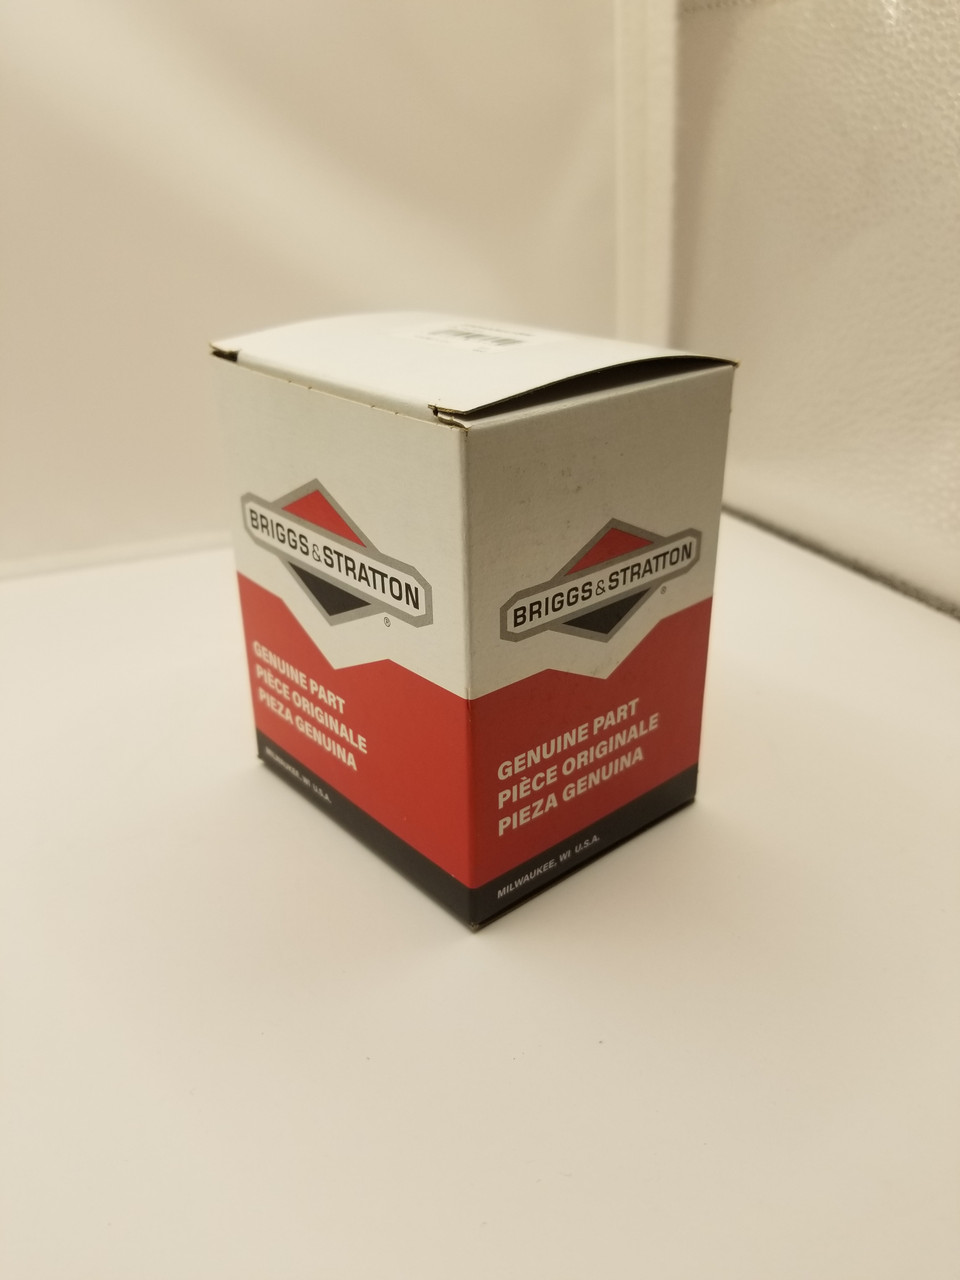 ENGINE PACKED SINGLE CARTON - 21R707-0104-G1 package std